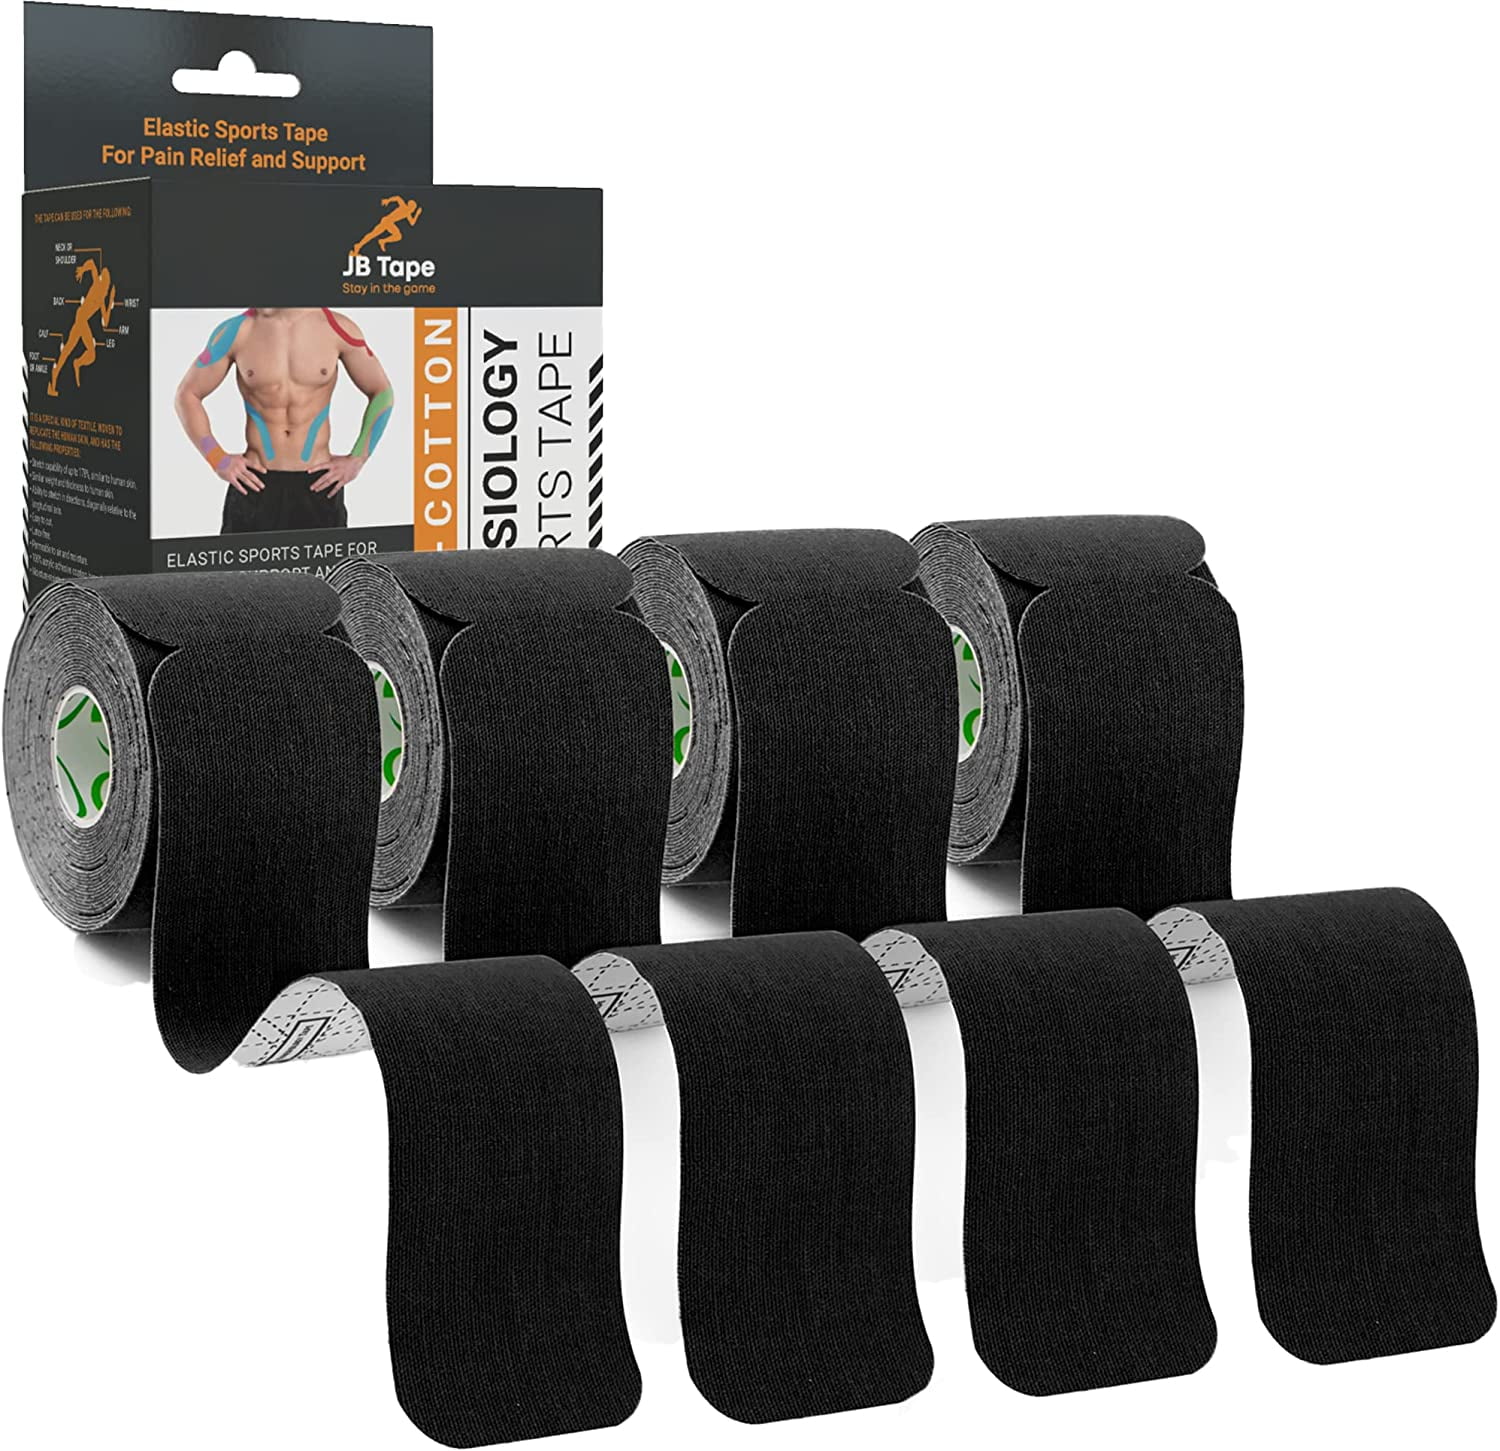 JJ Care Athletic Tape Support & Protection (3 Black Roll 1.5 x 15  yards[45ft])